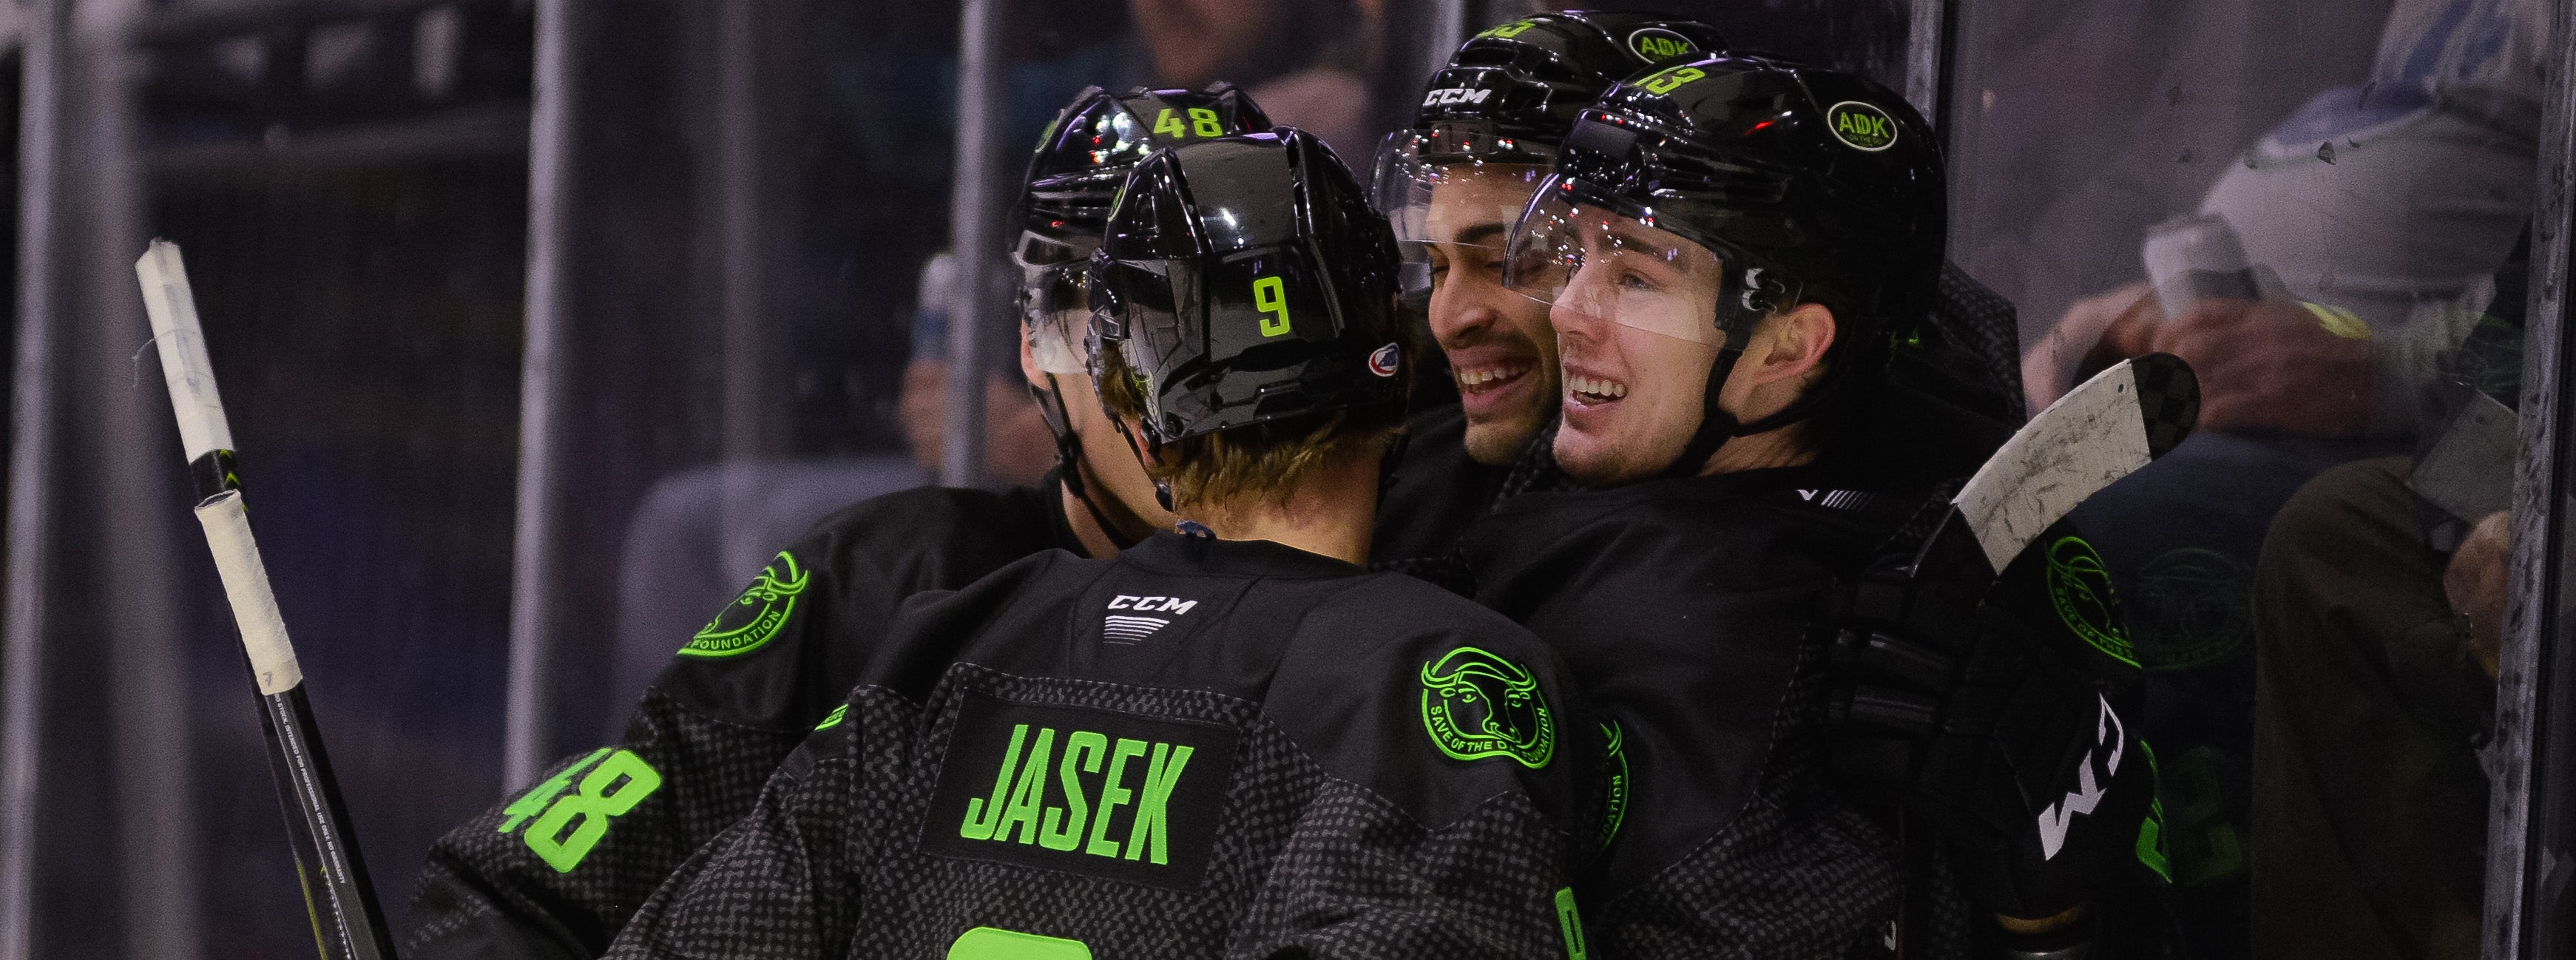 BAILEY’S SECOND STRAIGHT HAT TRICK POWERS COMETS TO WIN